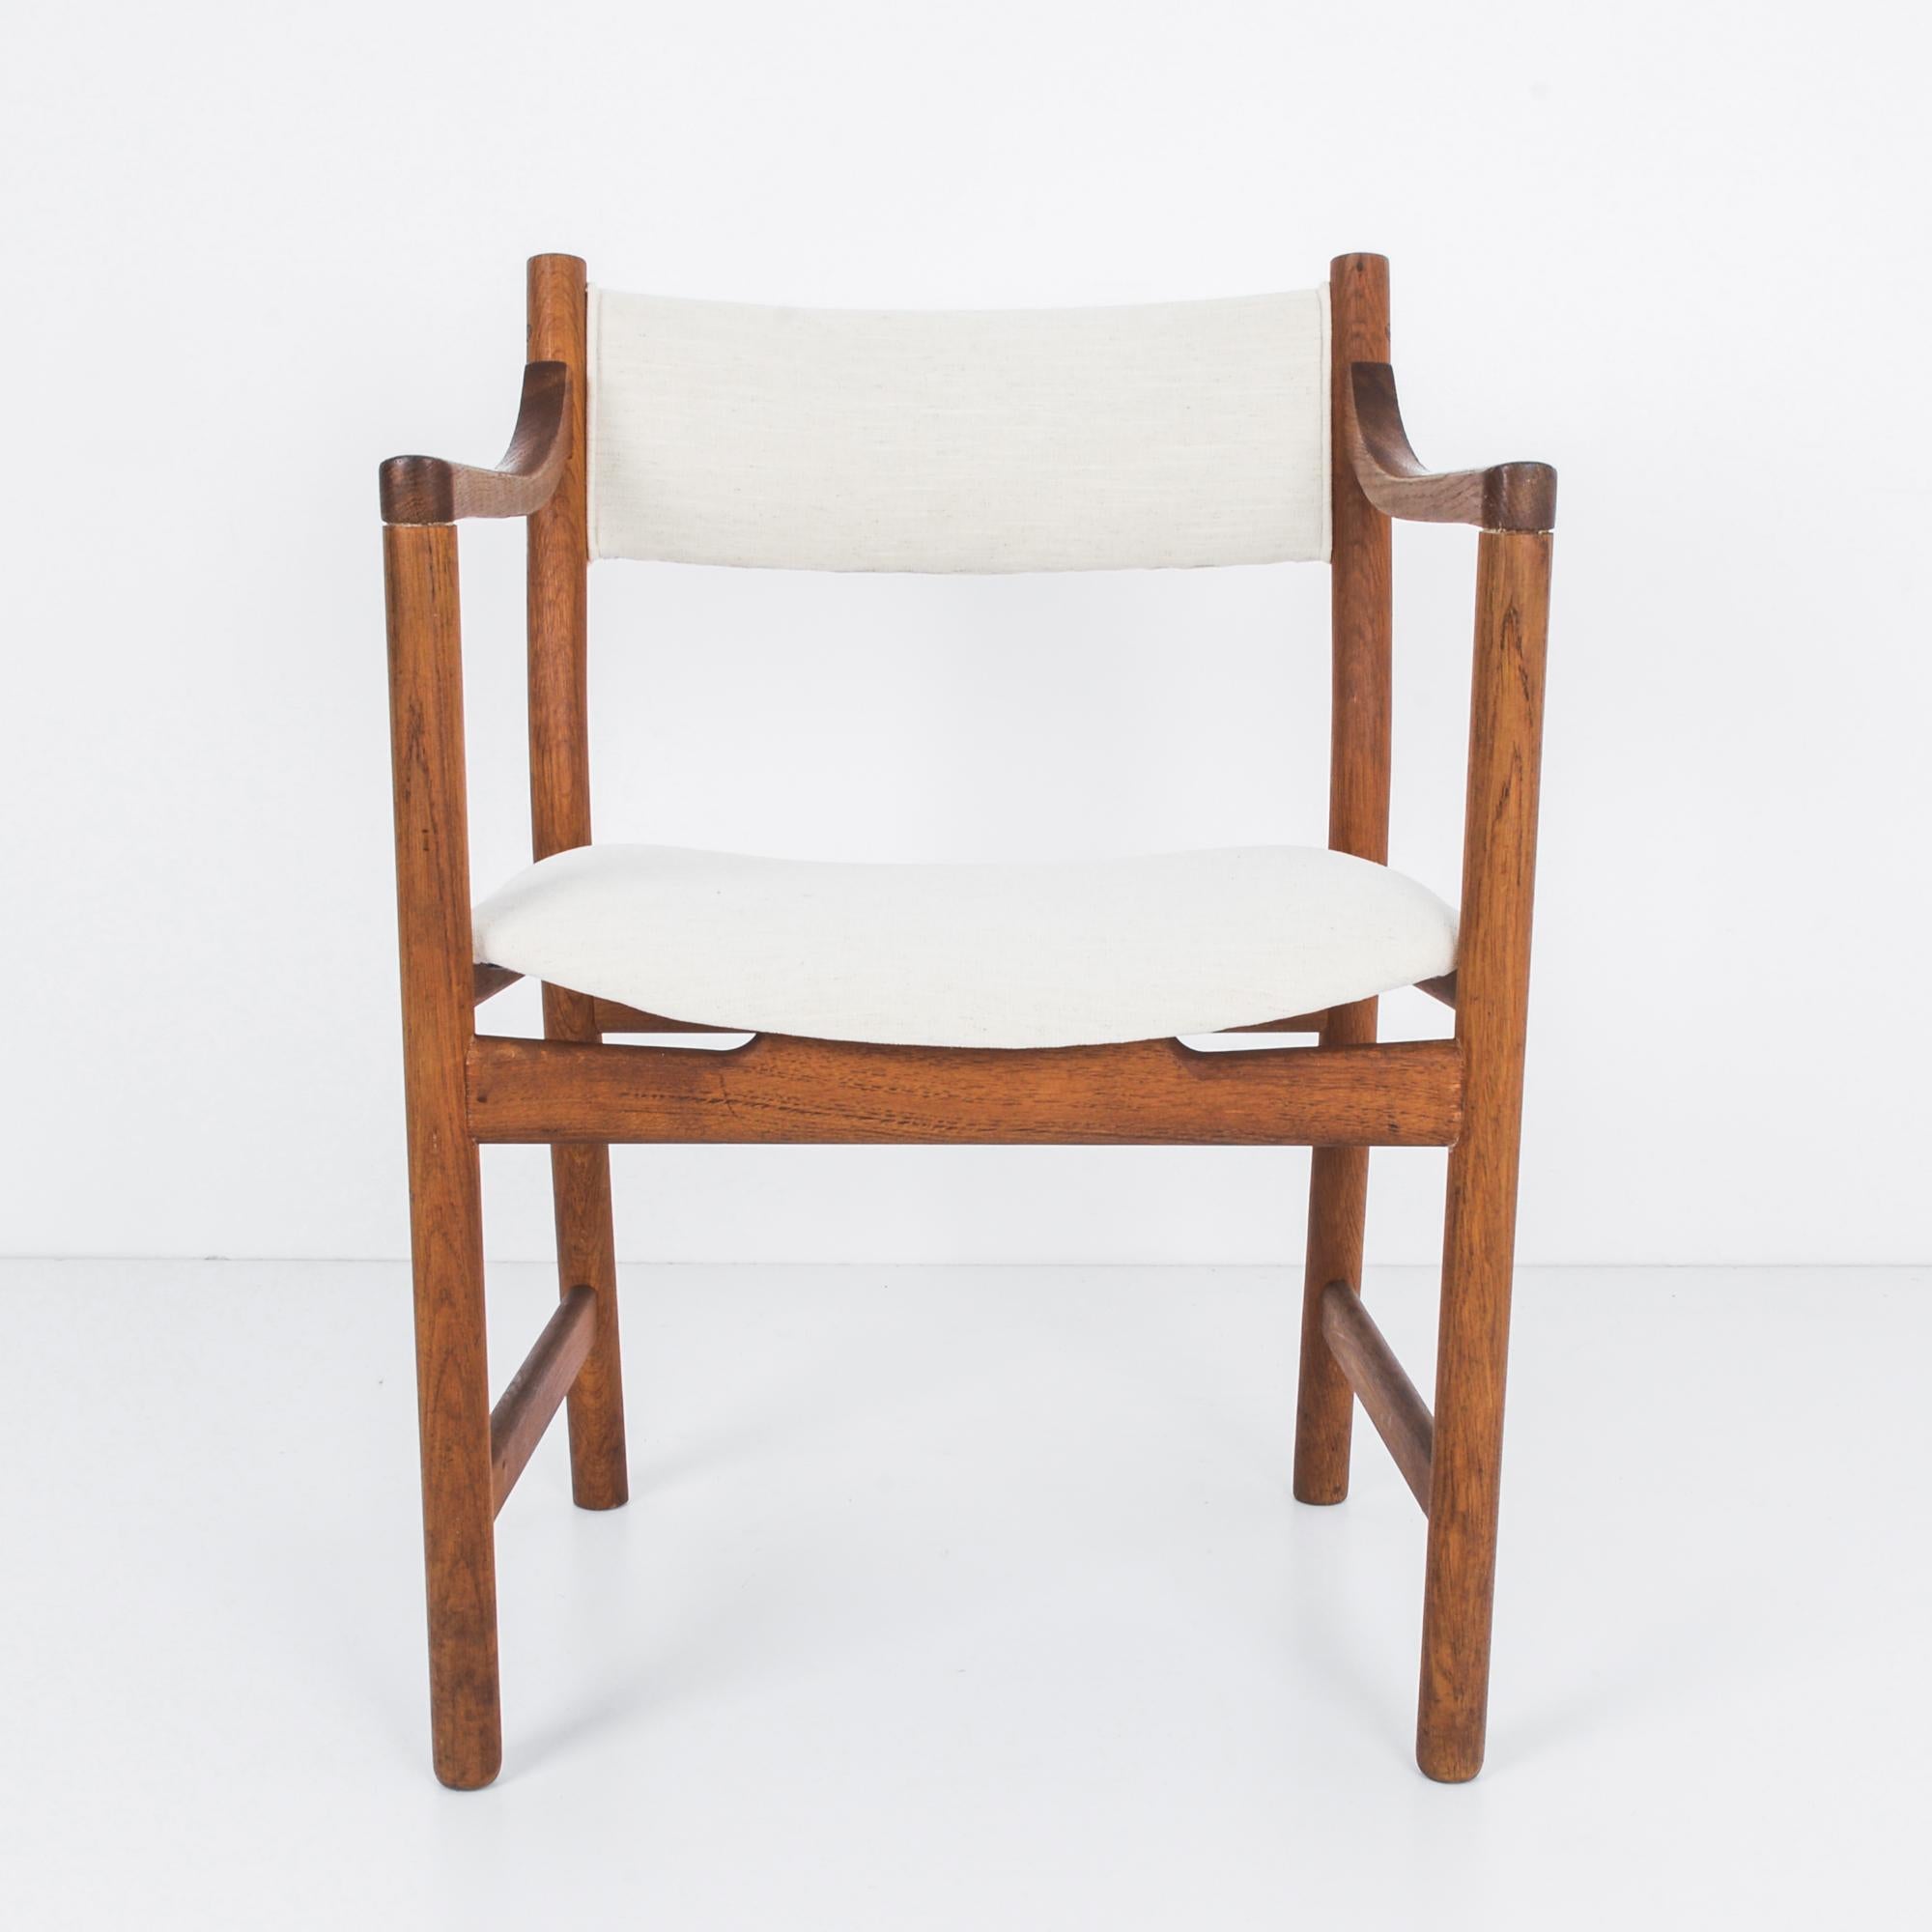 A teak armchair from Denmark, circa 1960s. An upright shape with a gentle angularity; the slant of the back legs counterbalances the soft recline of the backrest and the subtle upwards tilt of the seat. An upholstered seat and backrest in a natural